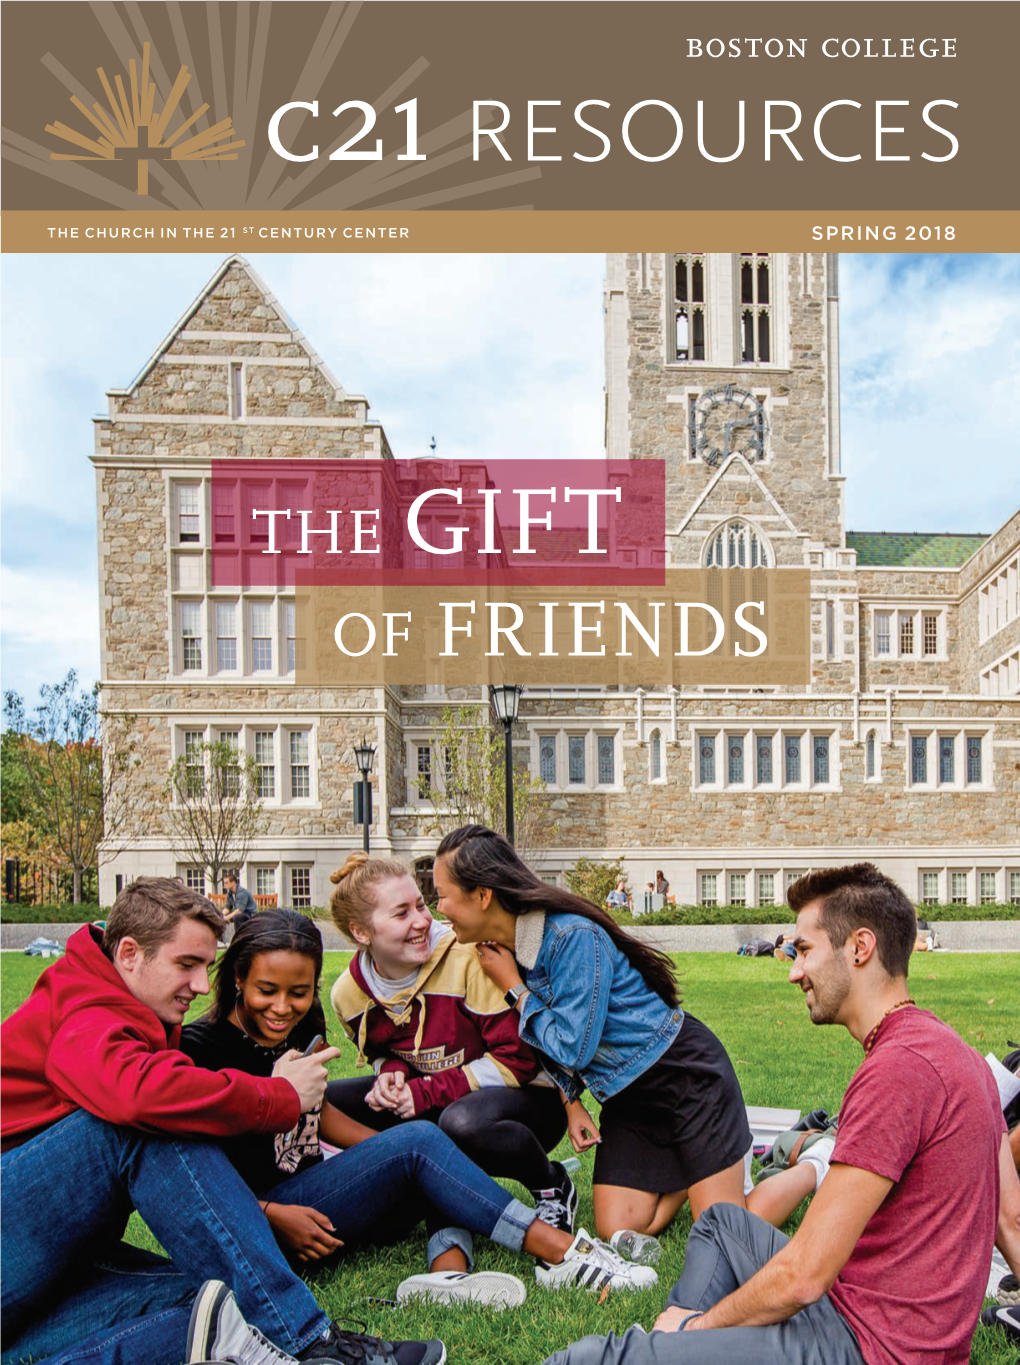 OF FRIENDS on the Cover BC Students on the Lawn Behind Guest Editor C21 Resources Spring 2018 Gasson Hall